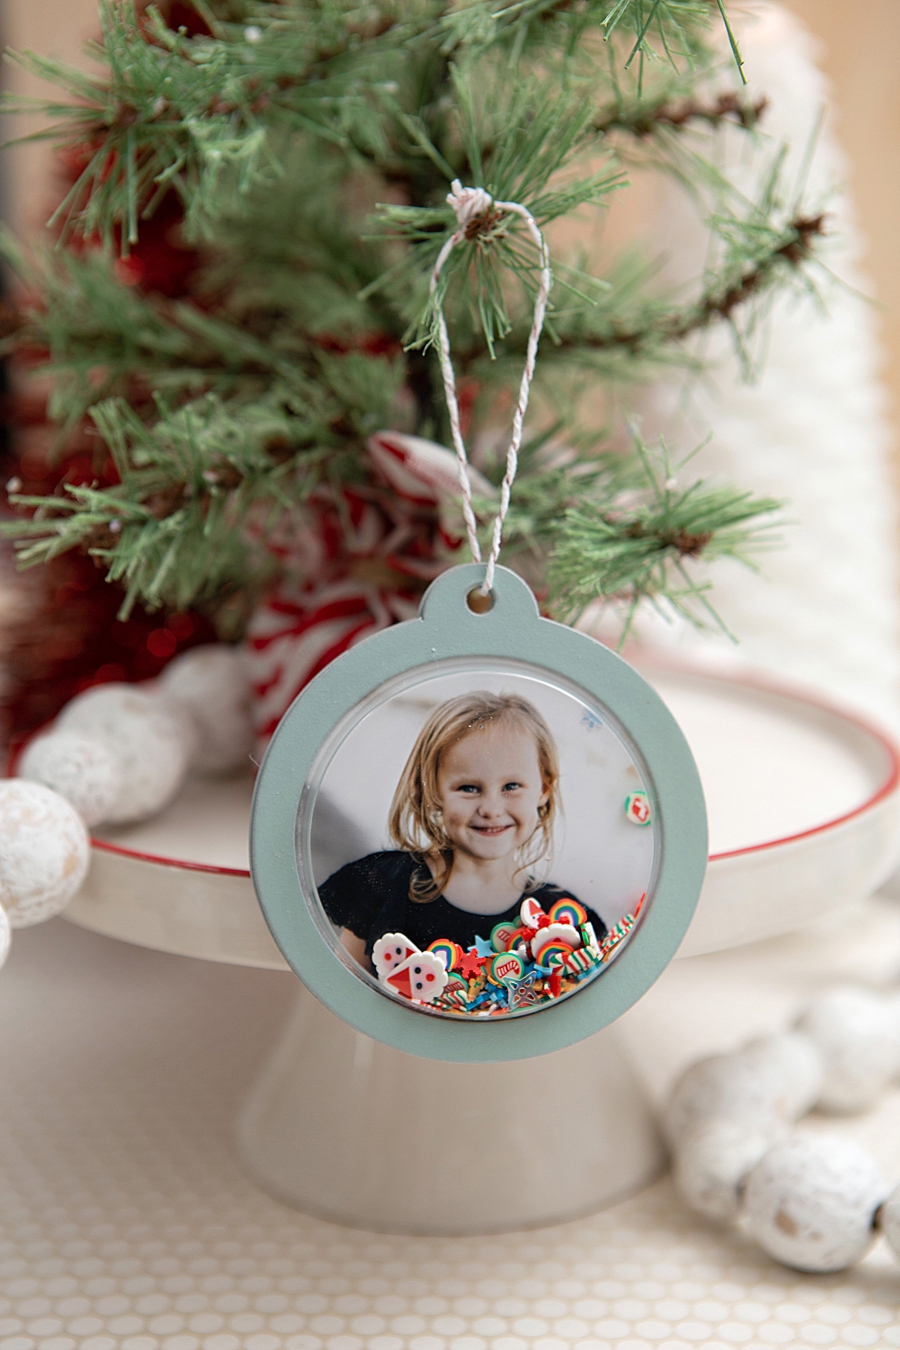 These photo shaker ornaments were so fun to make!